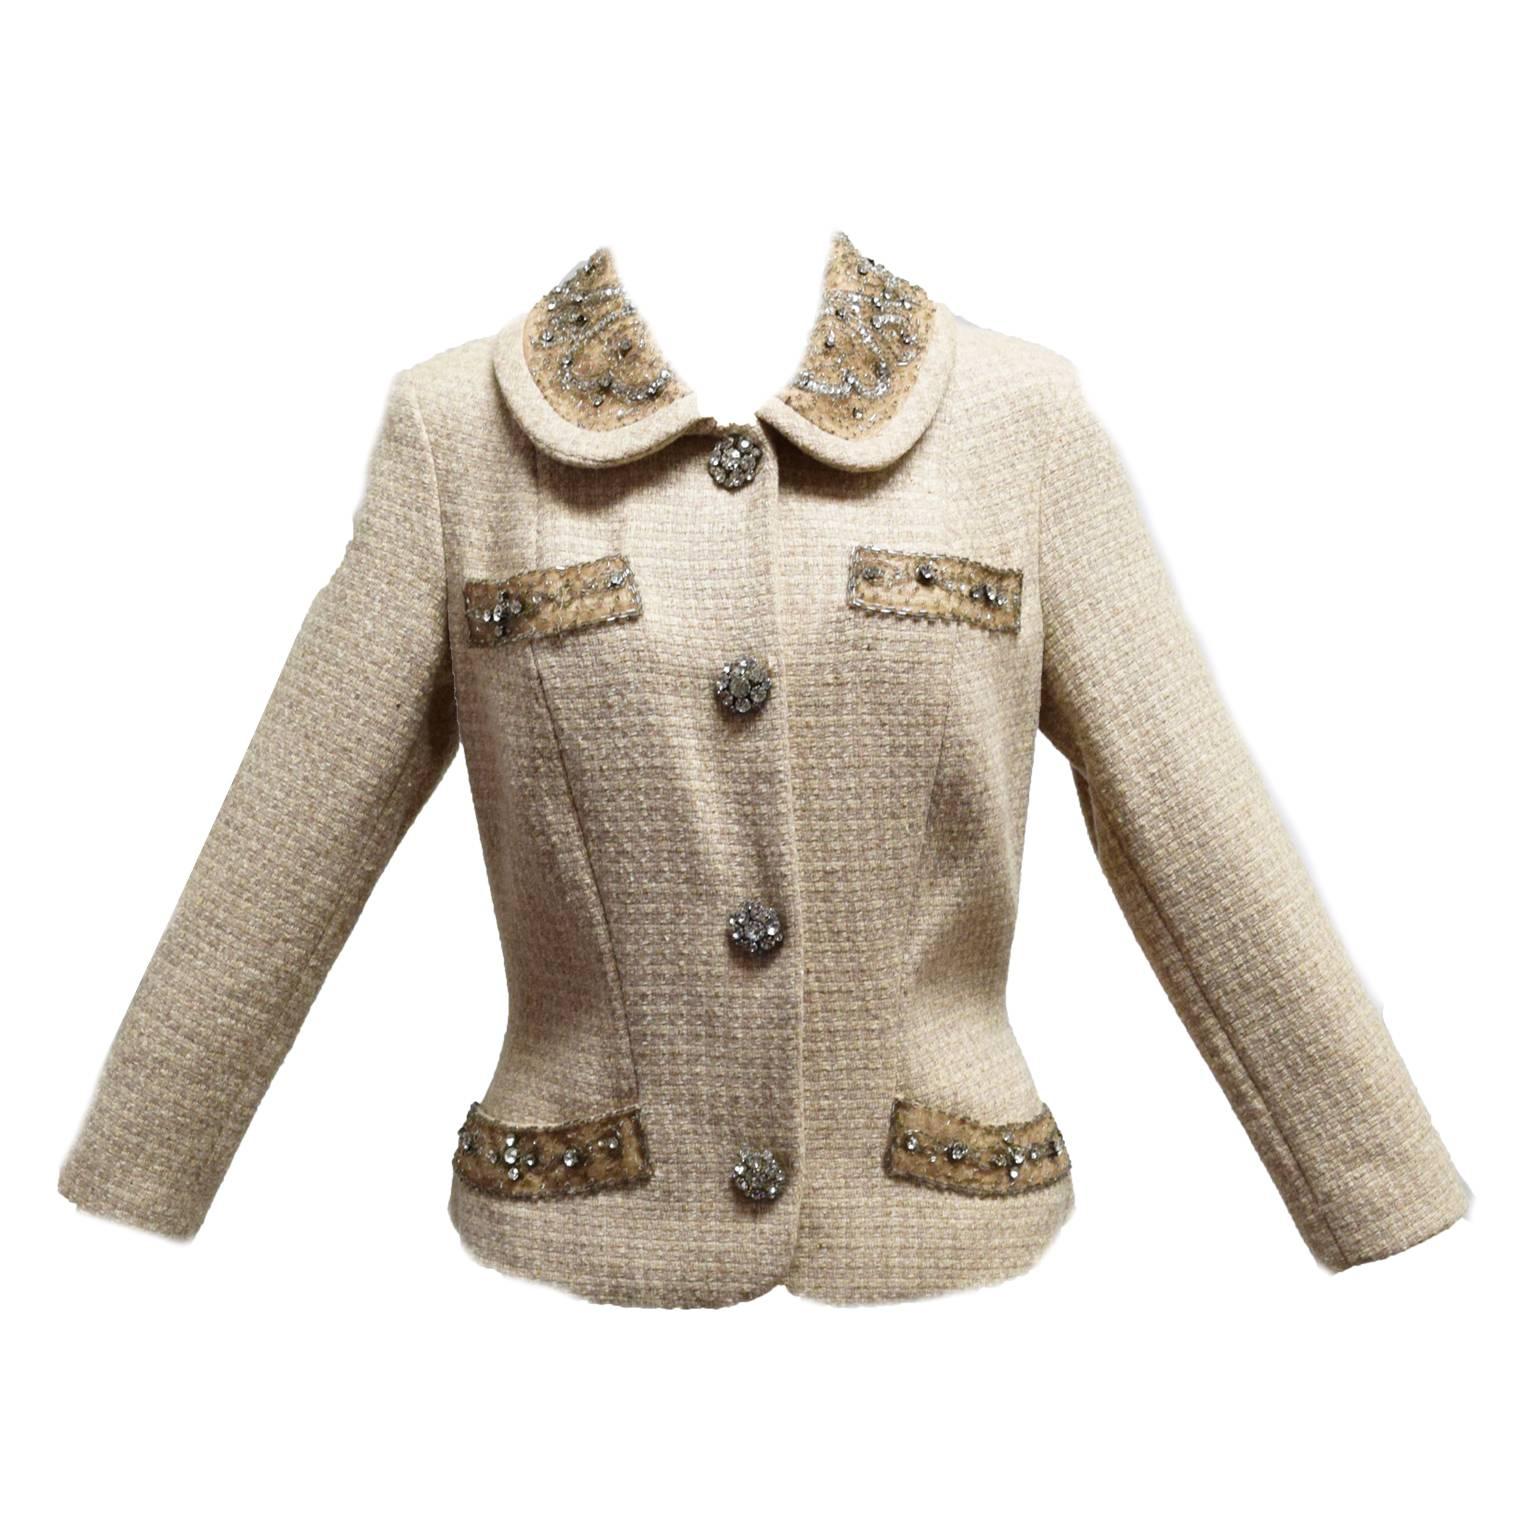 Tracy Reese Wool Beige Jacket with Lace Contrast and Intricate Beading Design  For Sale